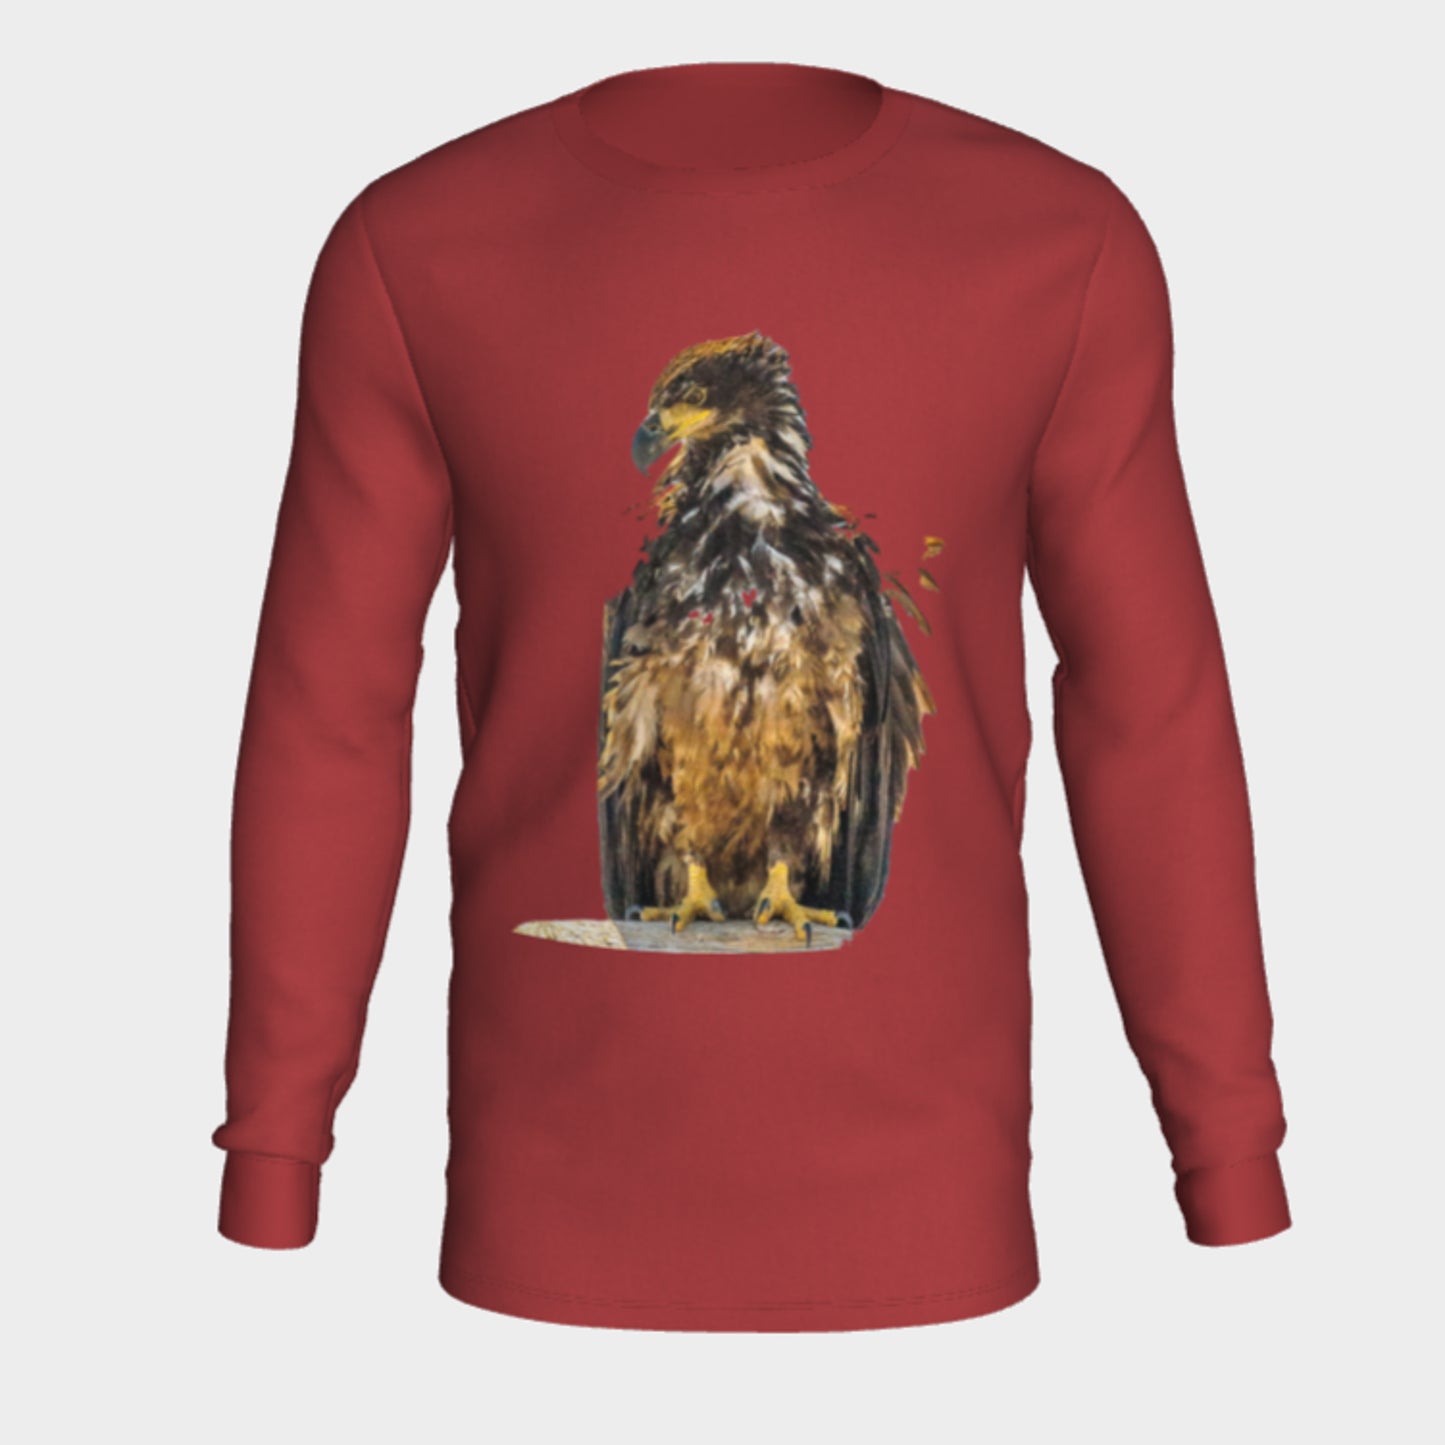 Eagle Eye Long Sleeve Unisex T-Shirt Features:  Flattering unisex fit Cozy long sleeves Crew neck Made with Milltex lightweight fabric Sizes small to 2XL